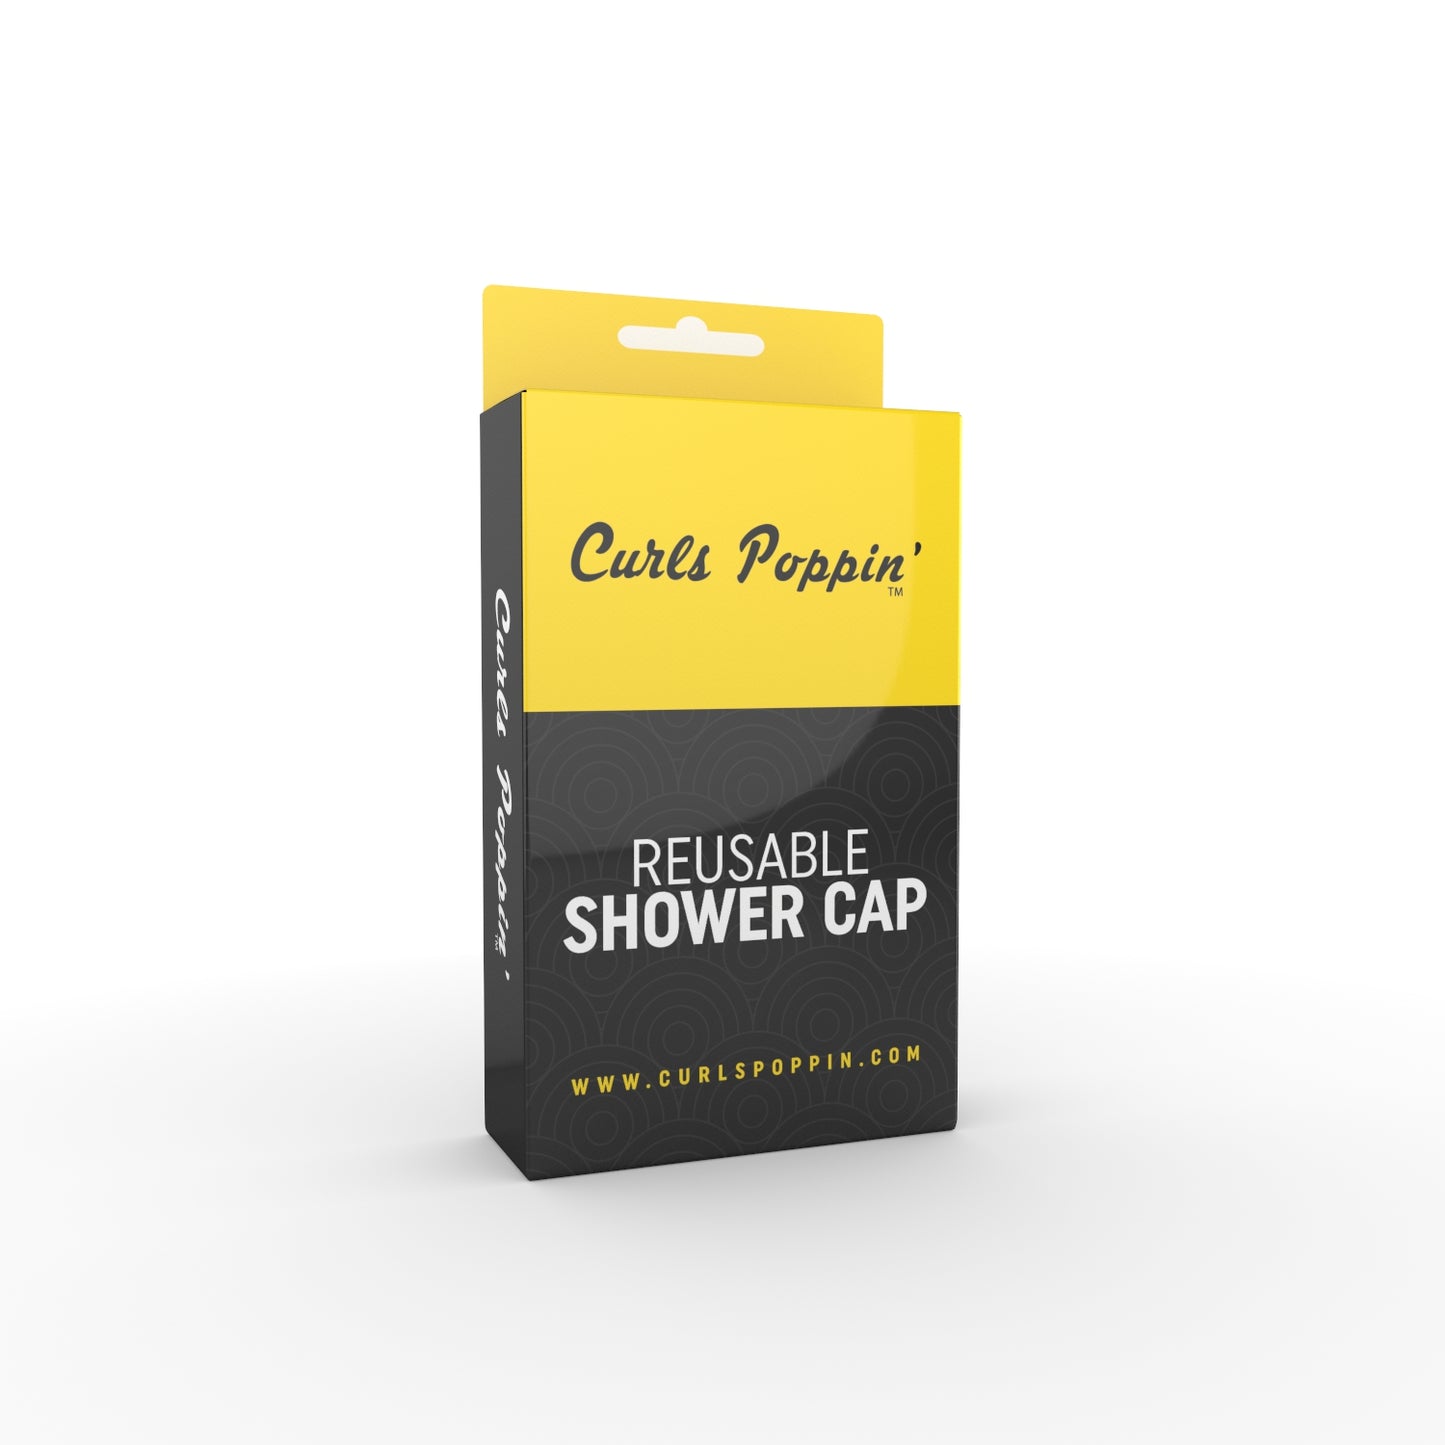 Reusable Shower cap for curly hair